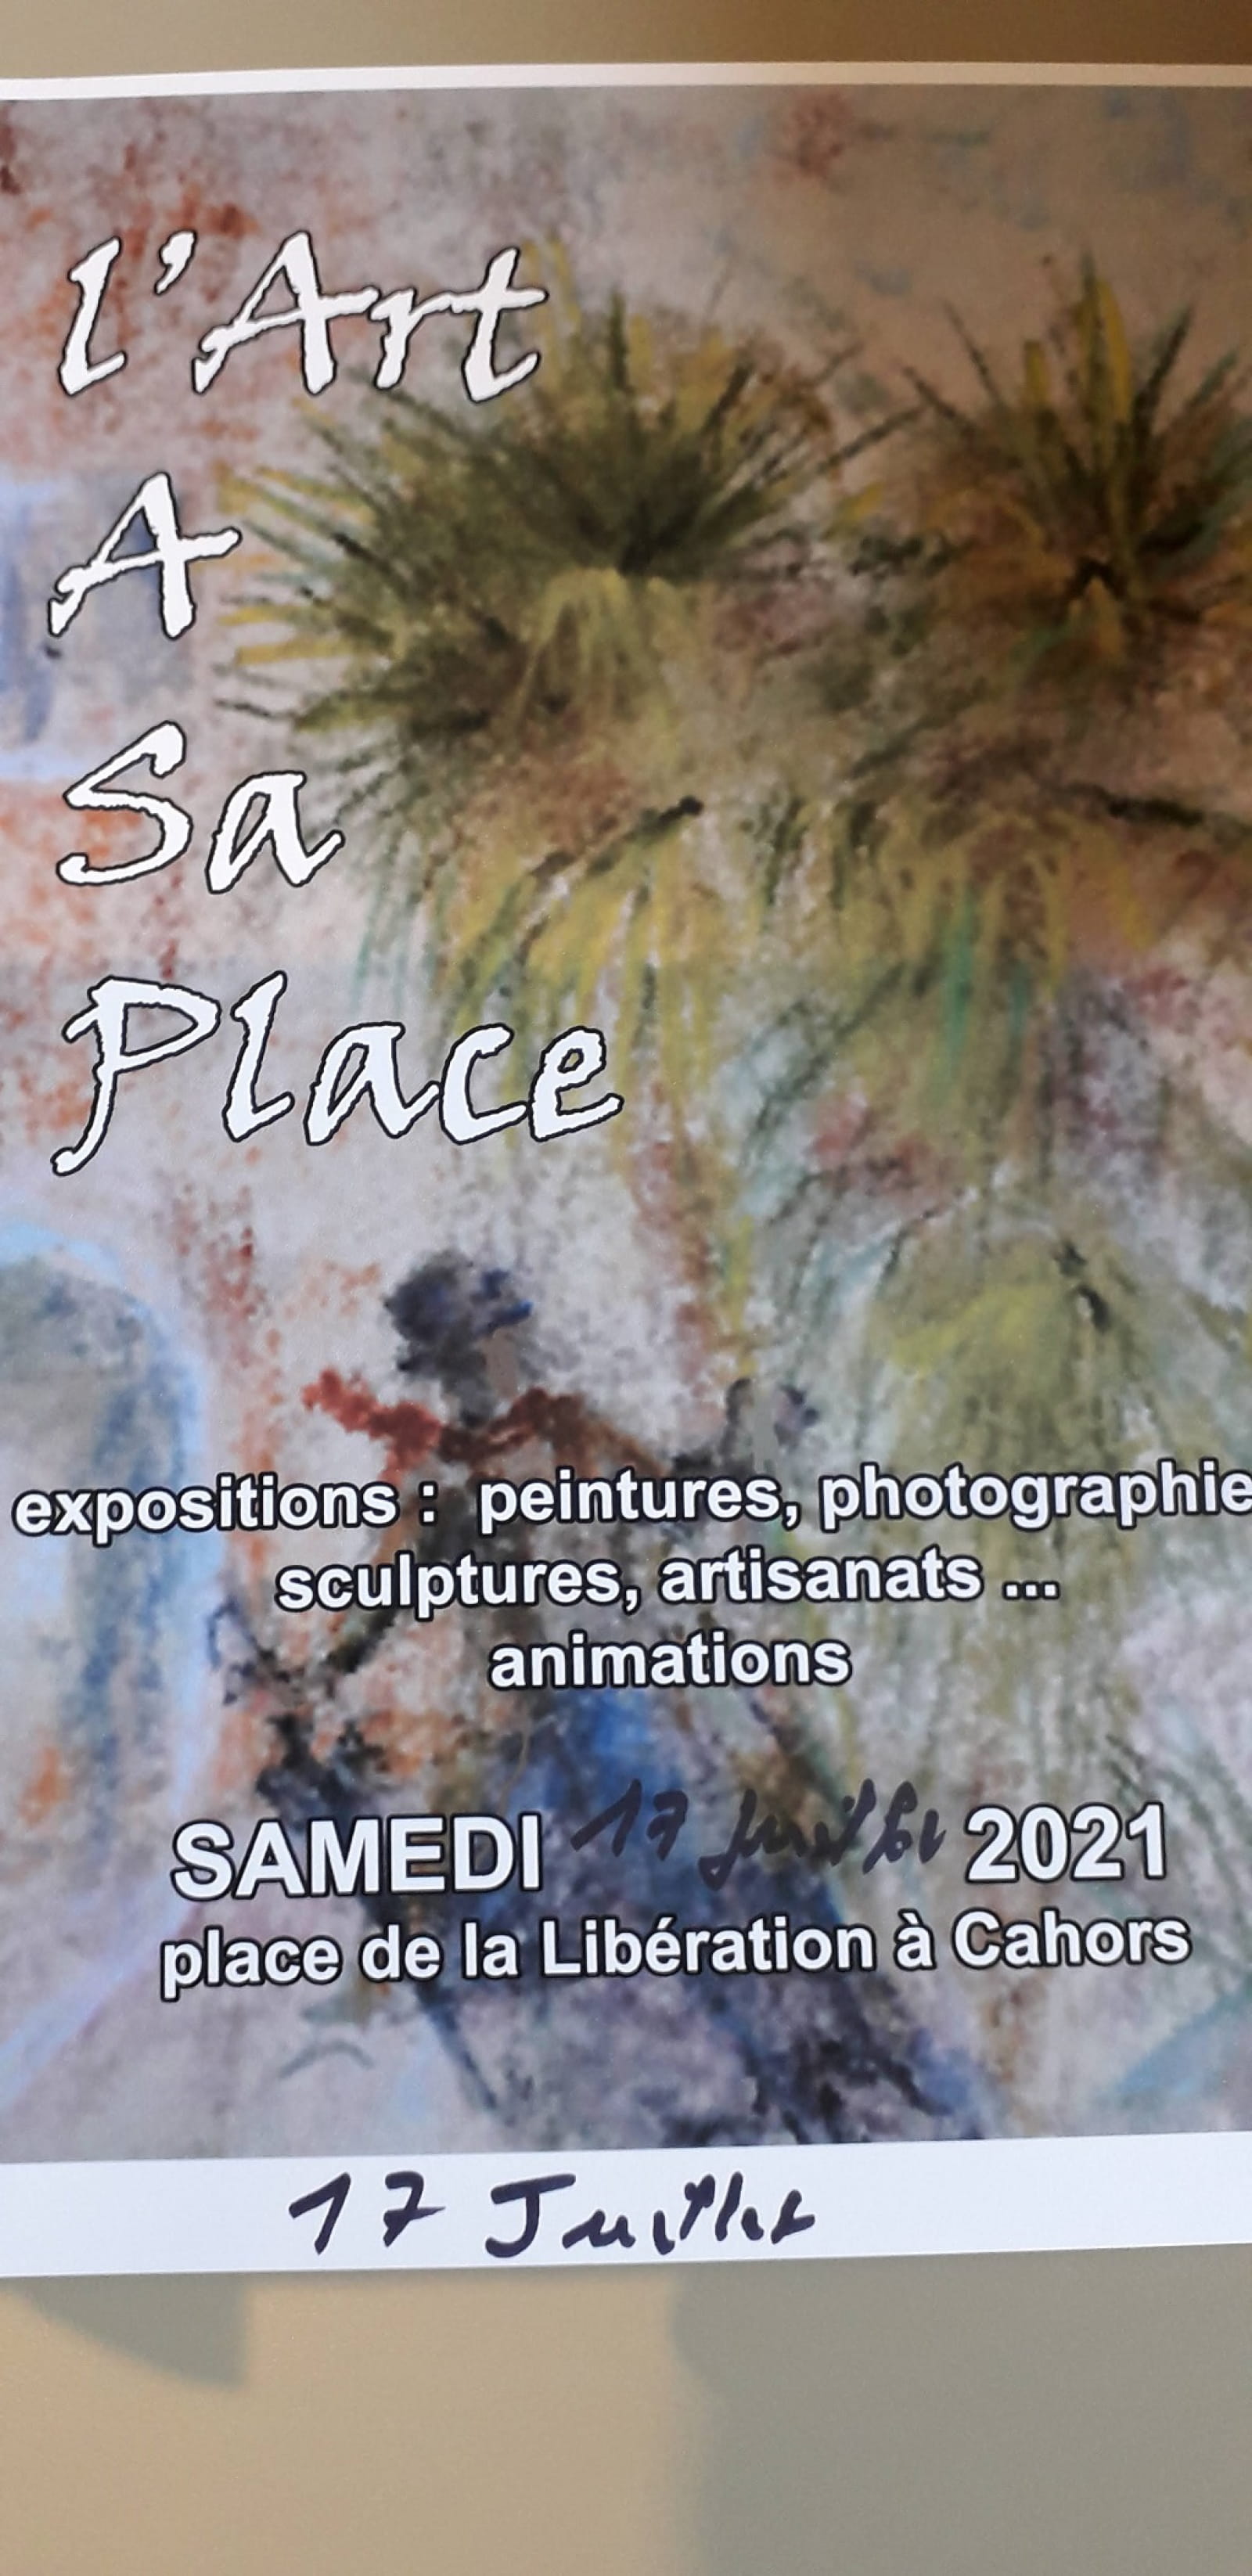 » ANNULATION » Exposition « l’Art à sa Place » | Cahors - Valle del Lote